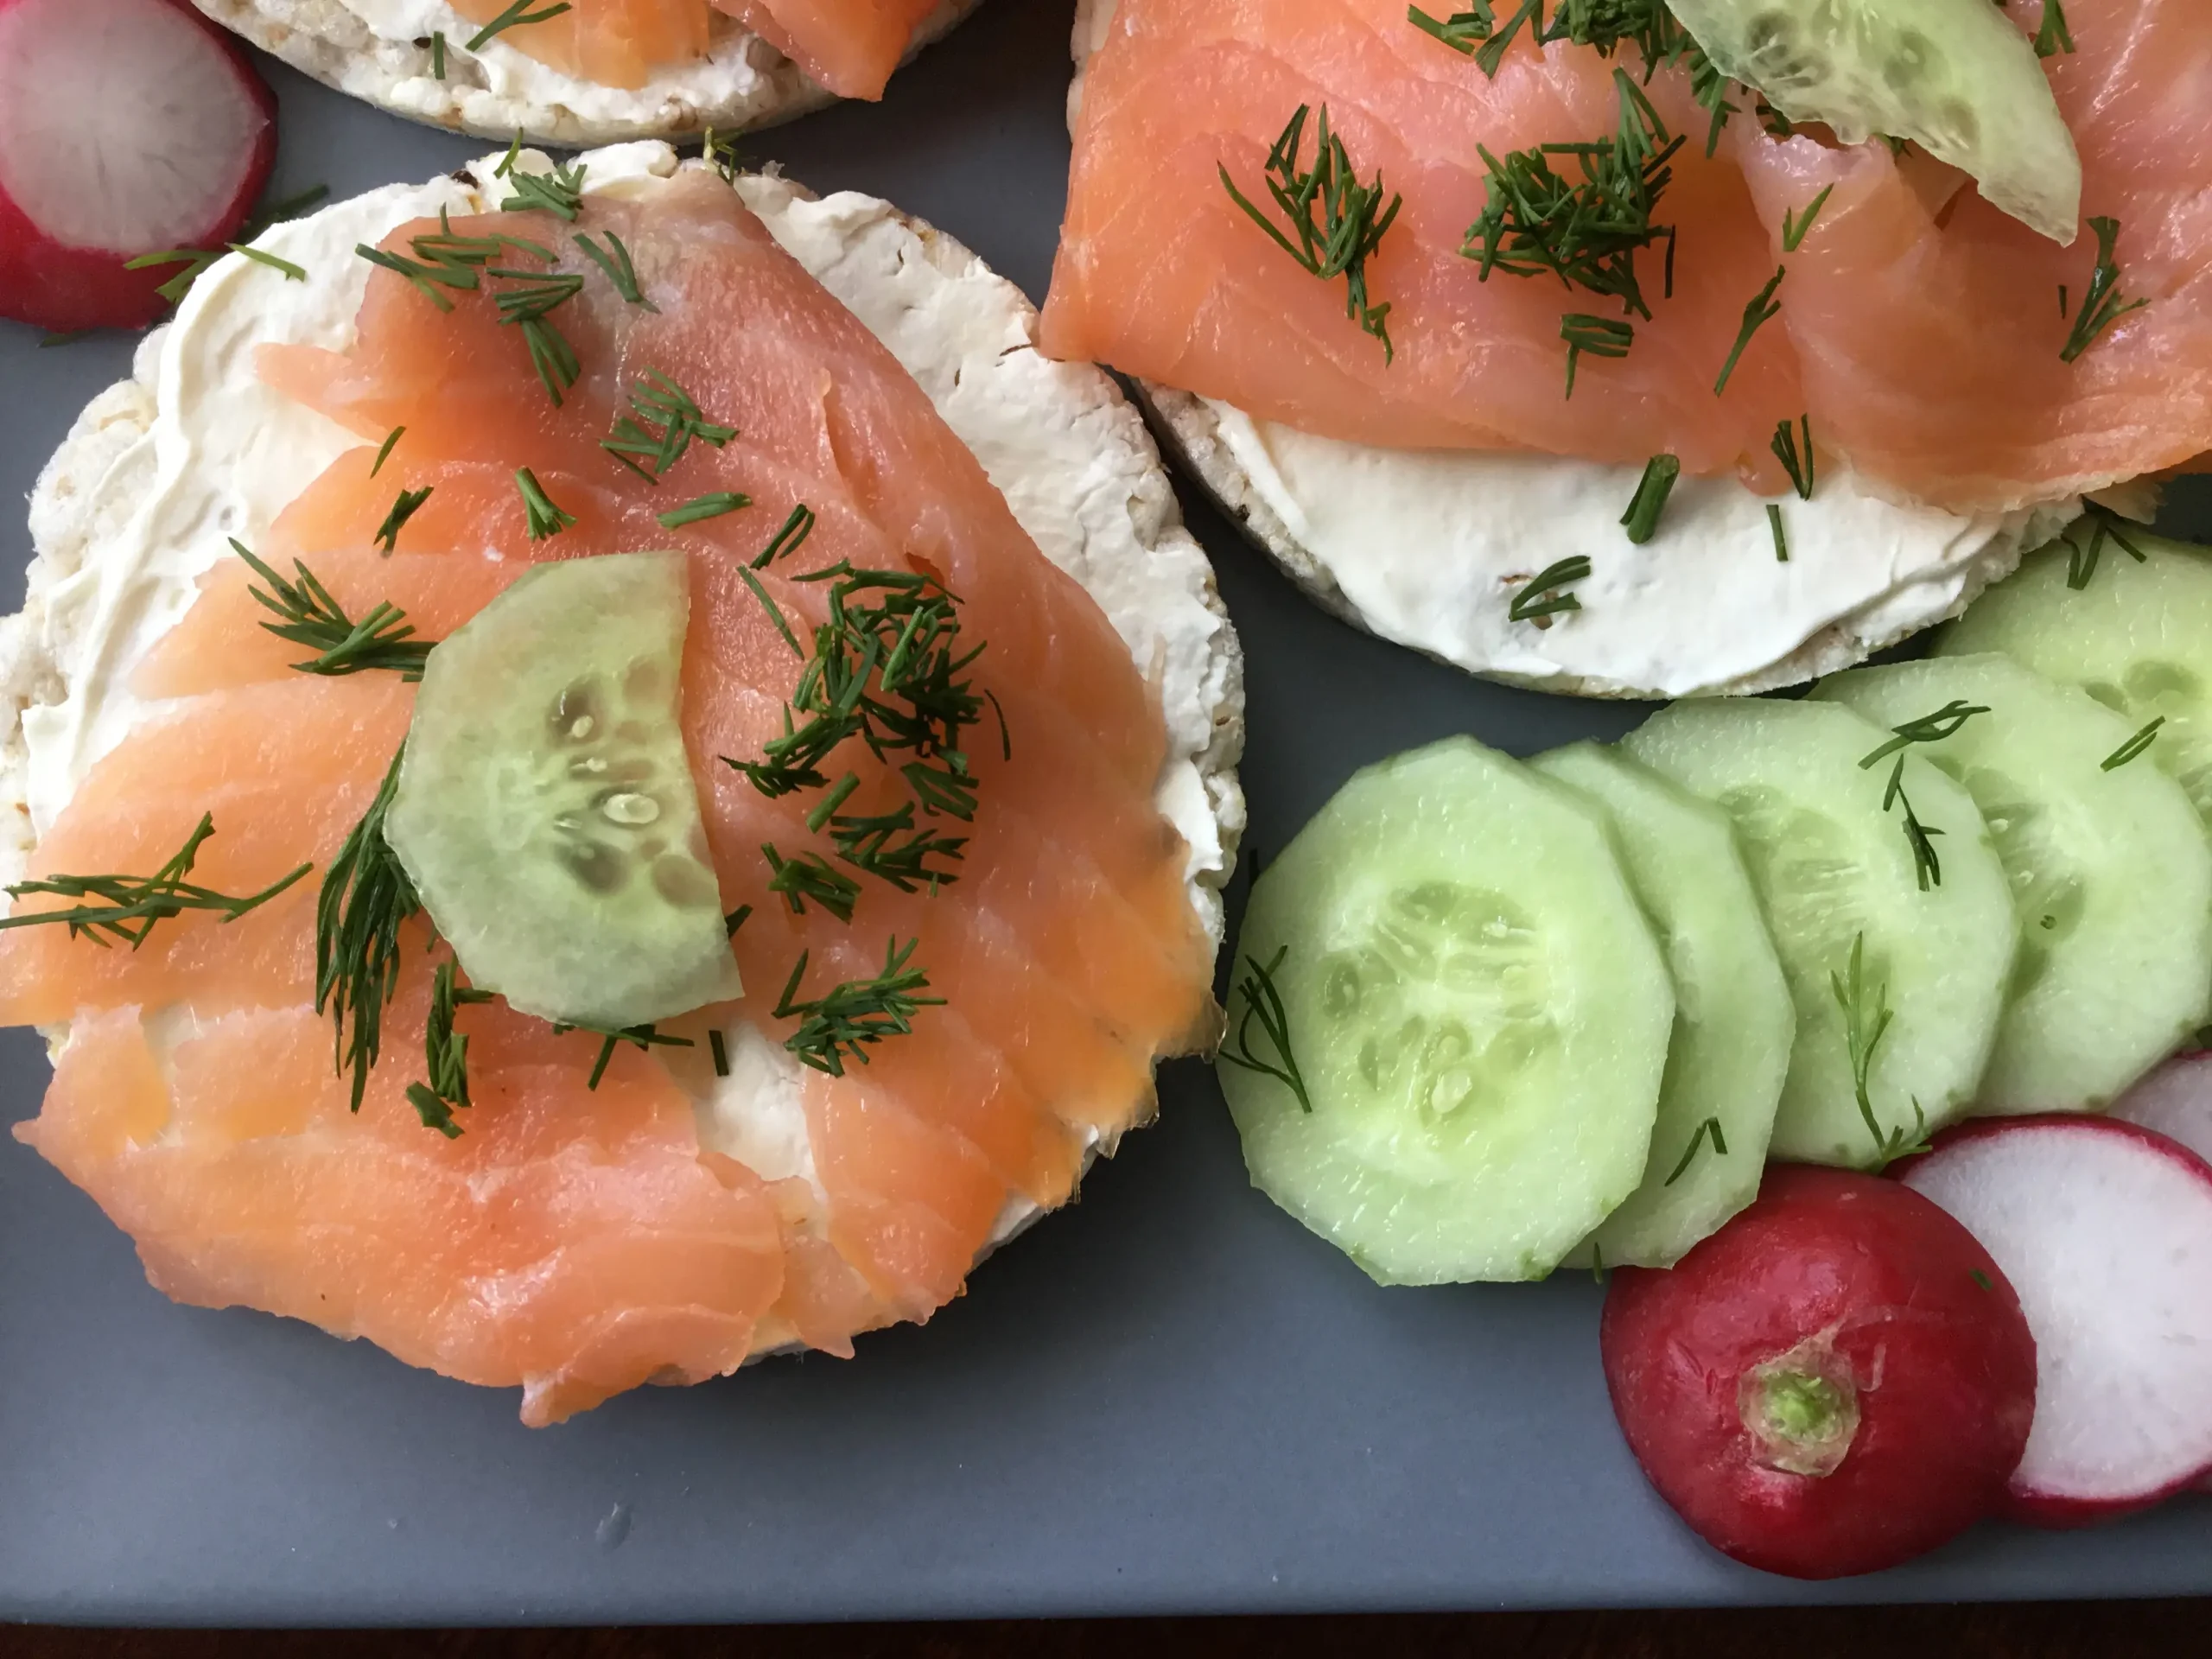 smoked salmon and ibs - Can salmon cause IBS flare up